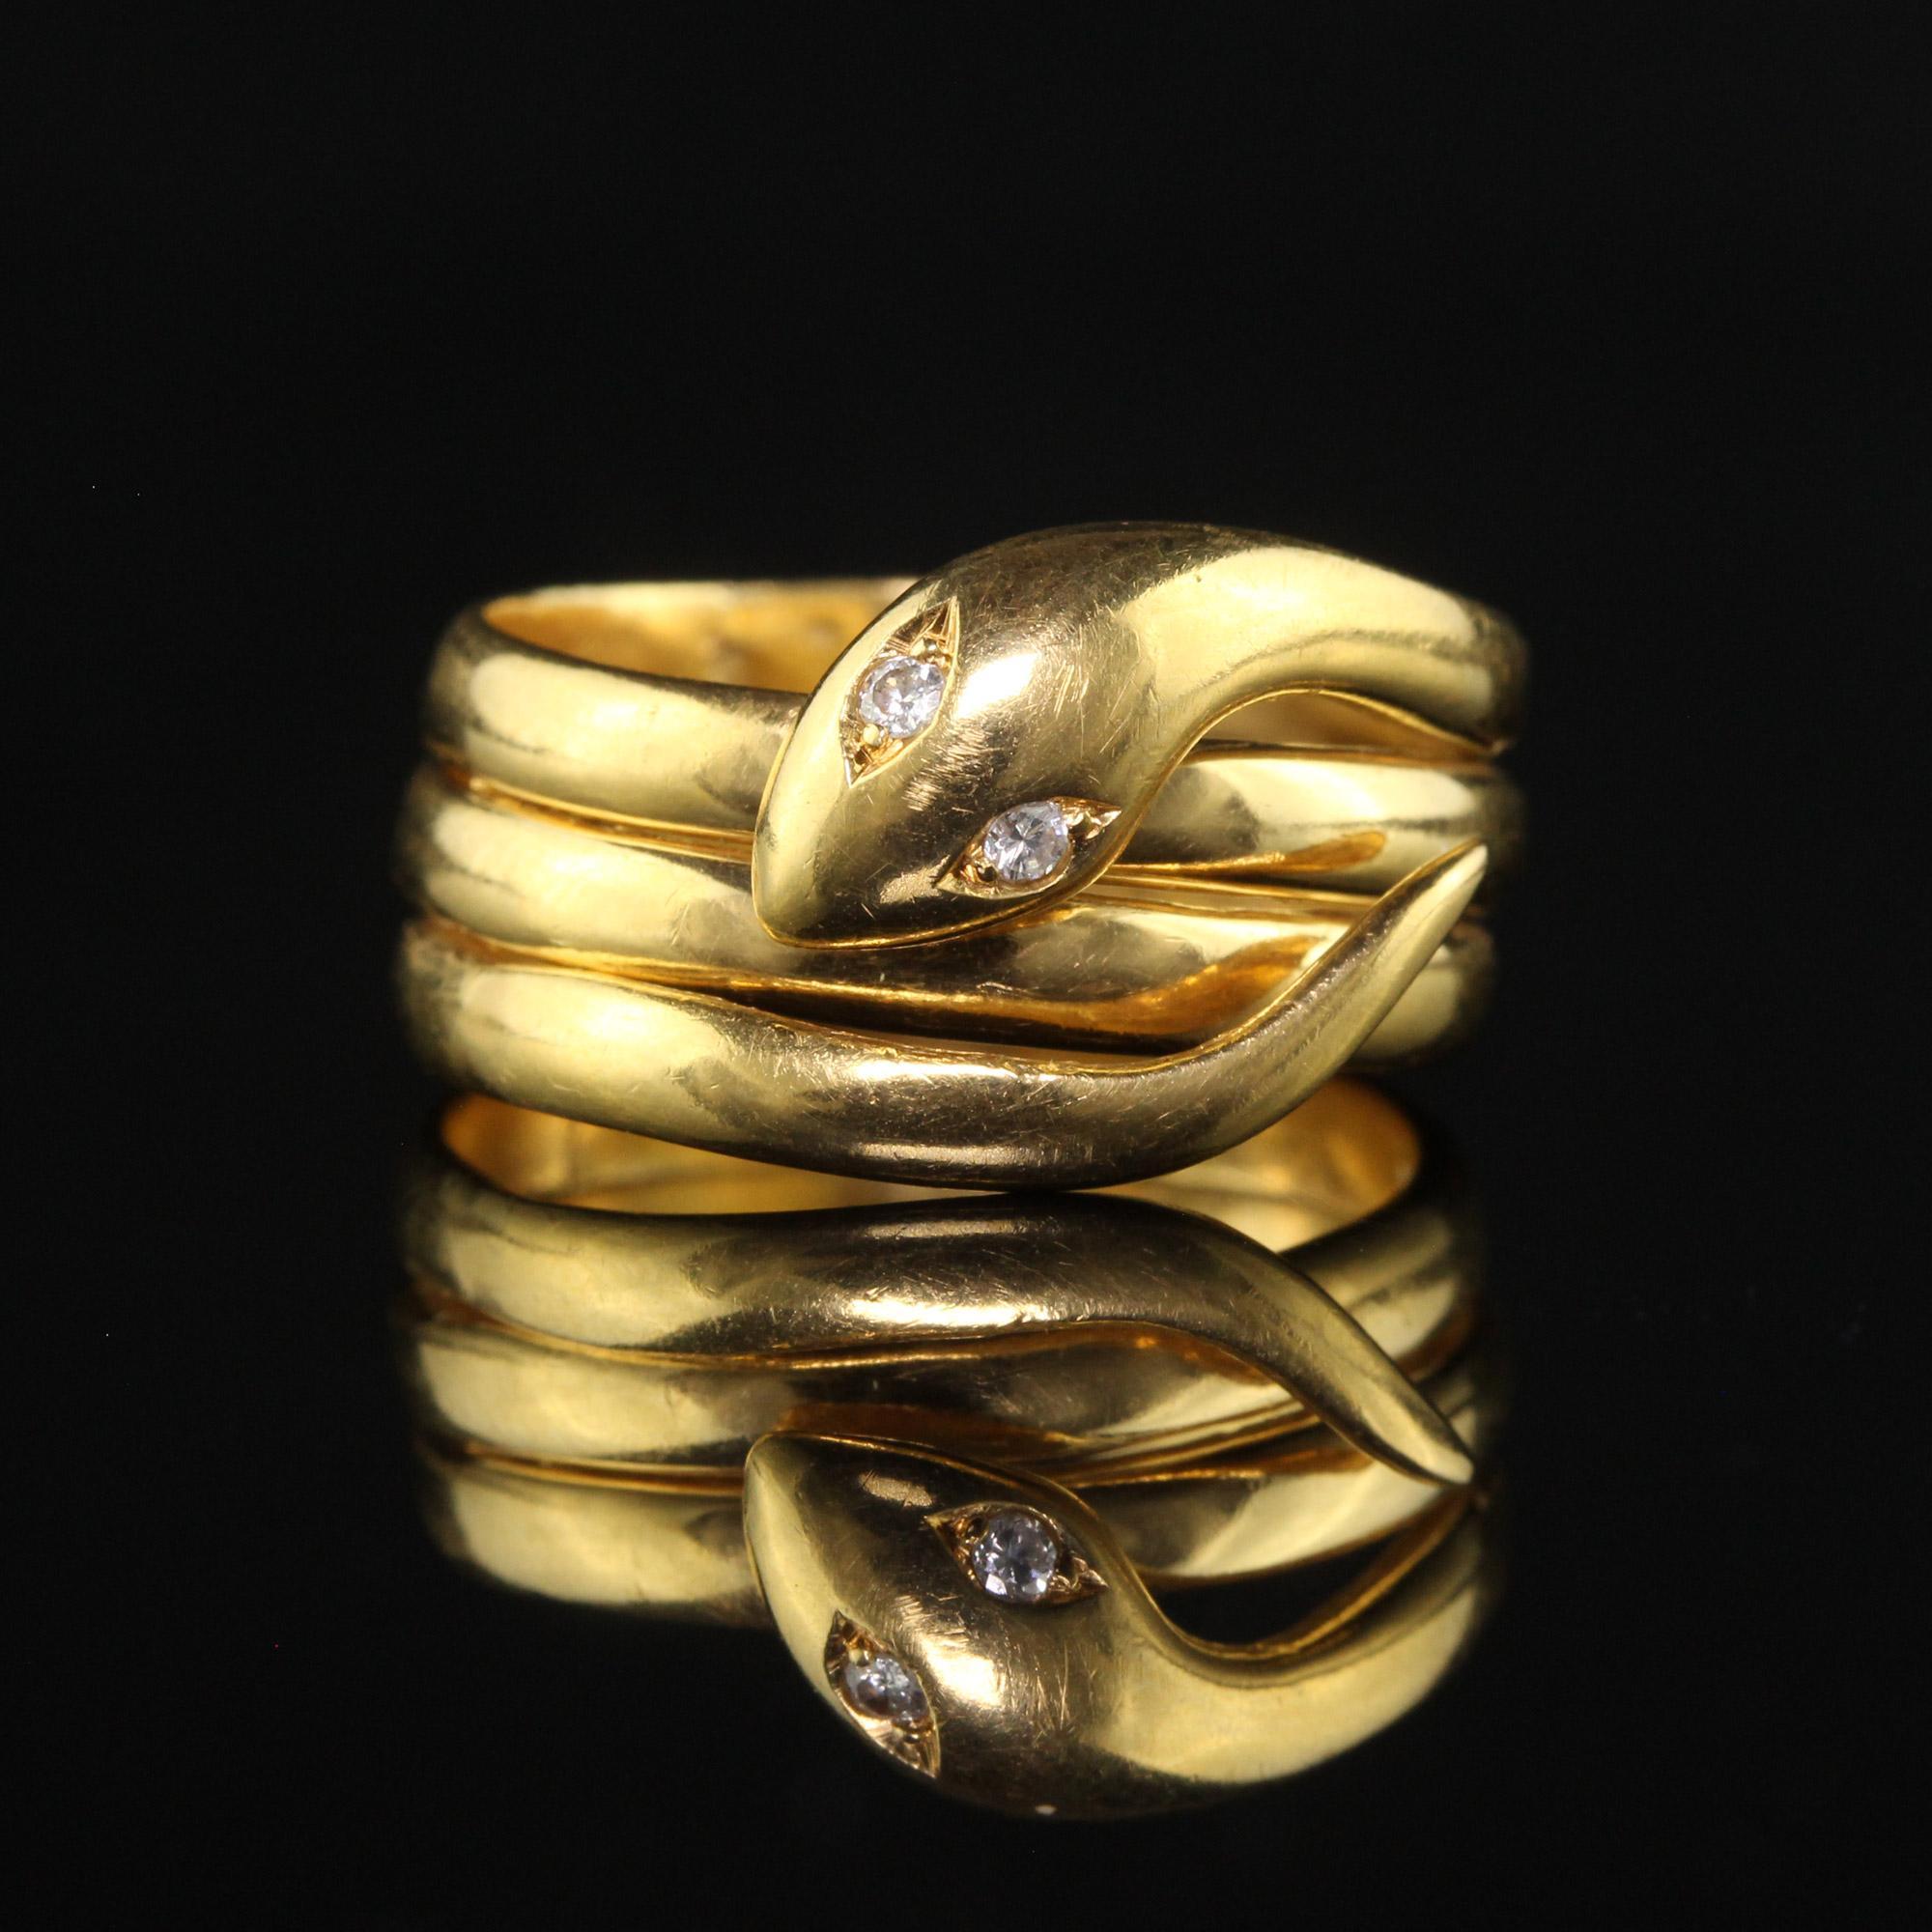 Antique Victorian 18K Yellow Gold Diamond Coiled Snaked Ring In Good Condition For Sale In Great Neck, NY